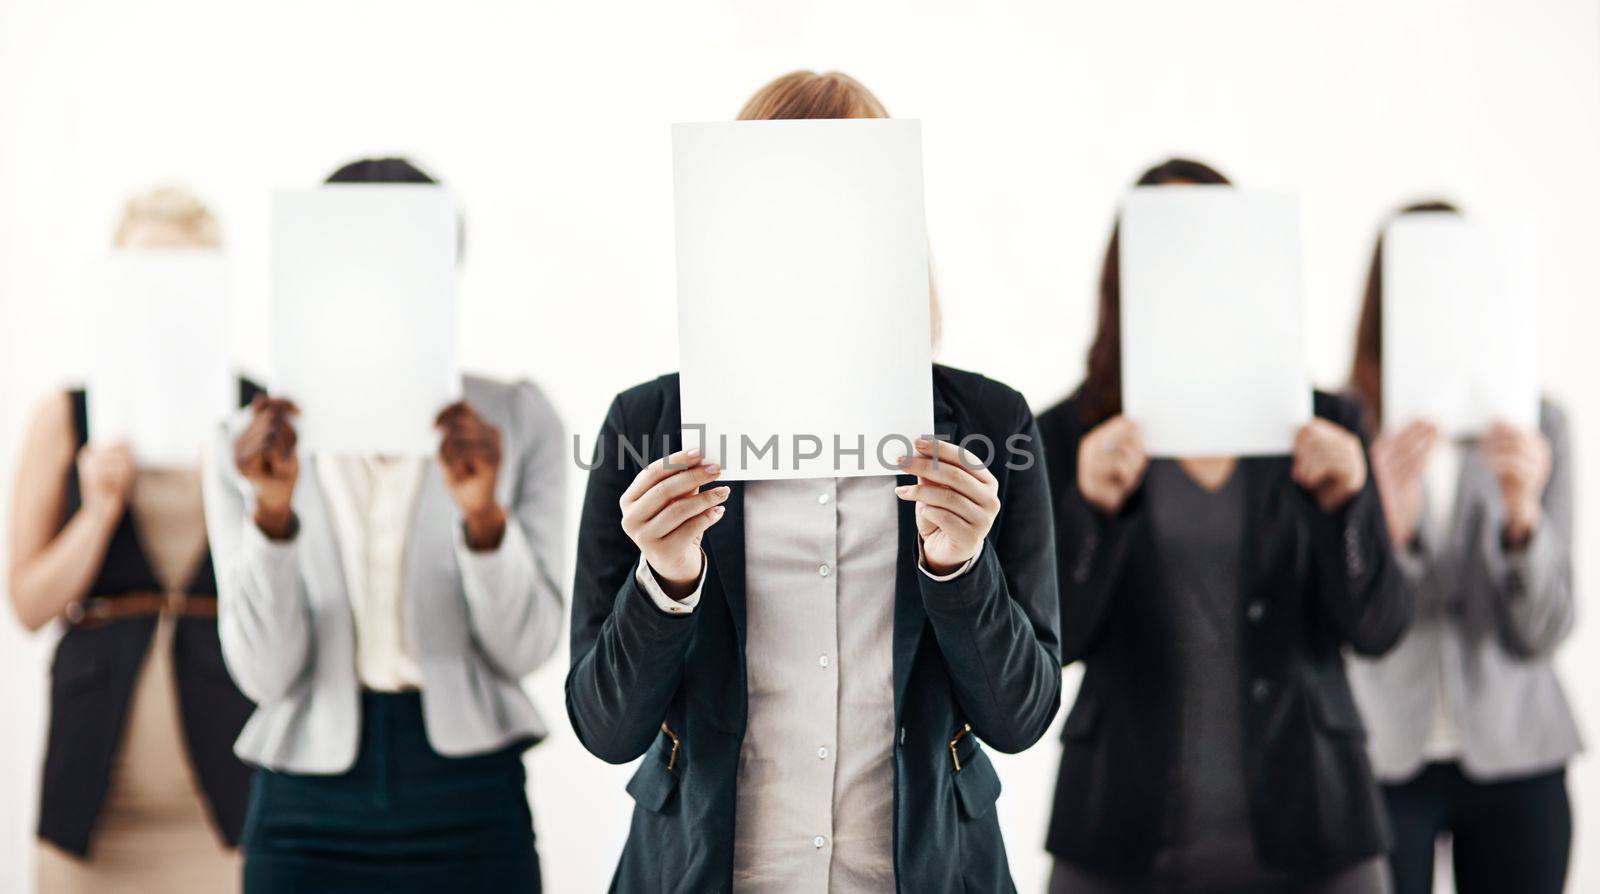 The reason behind their business success. a group of unrecognizable businesspeople holding blank pieces of paper over their faces against a white background